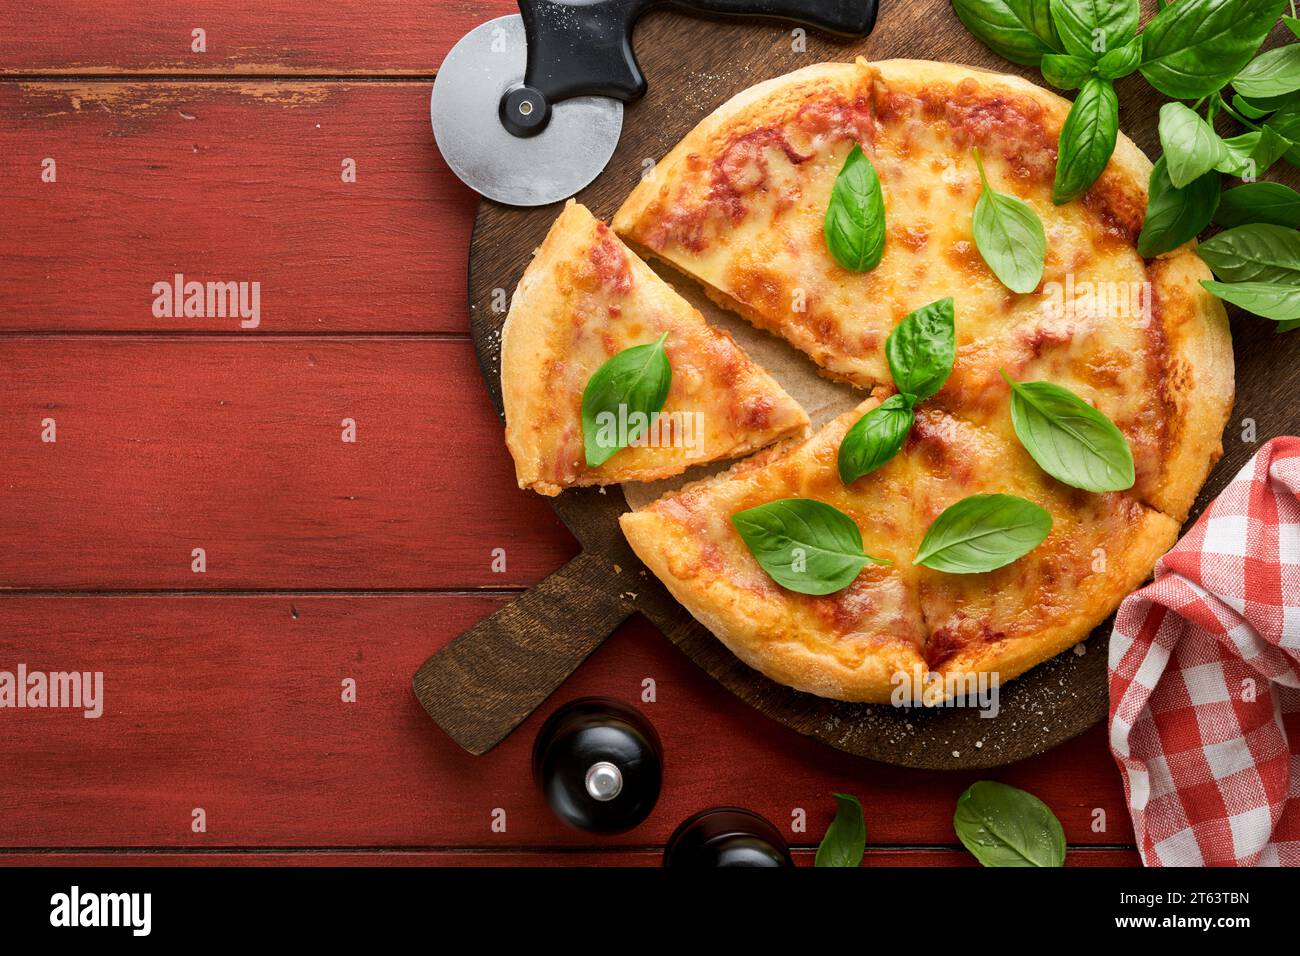 Margarita pizza. Traditional neapolitan margarita pizza and cooking ingredients tomatoes basil on wooden table backgrounds. Italian Traditional food. Stock Photo